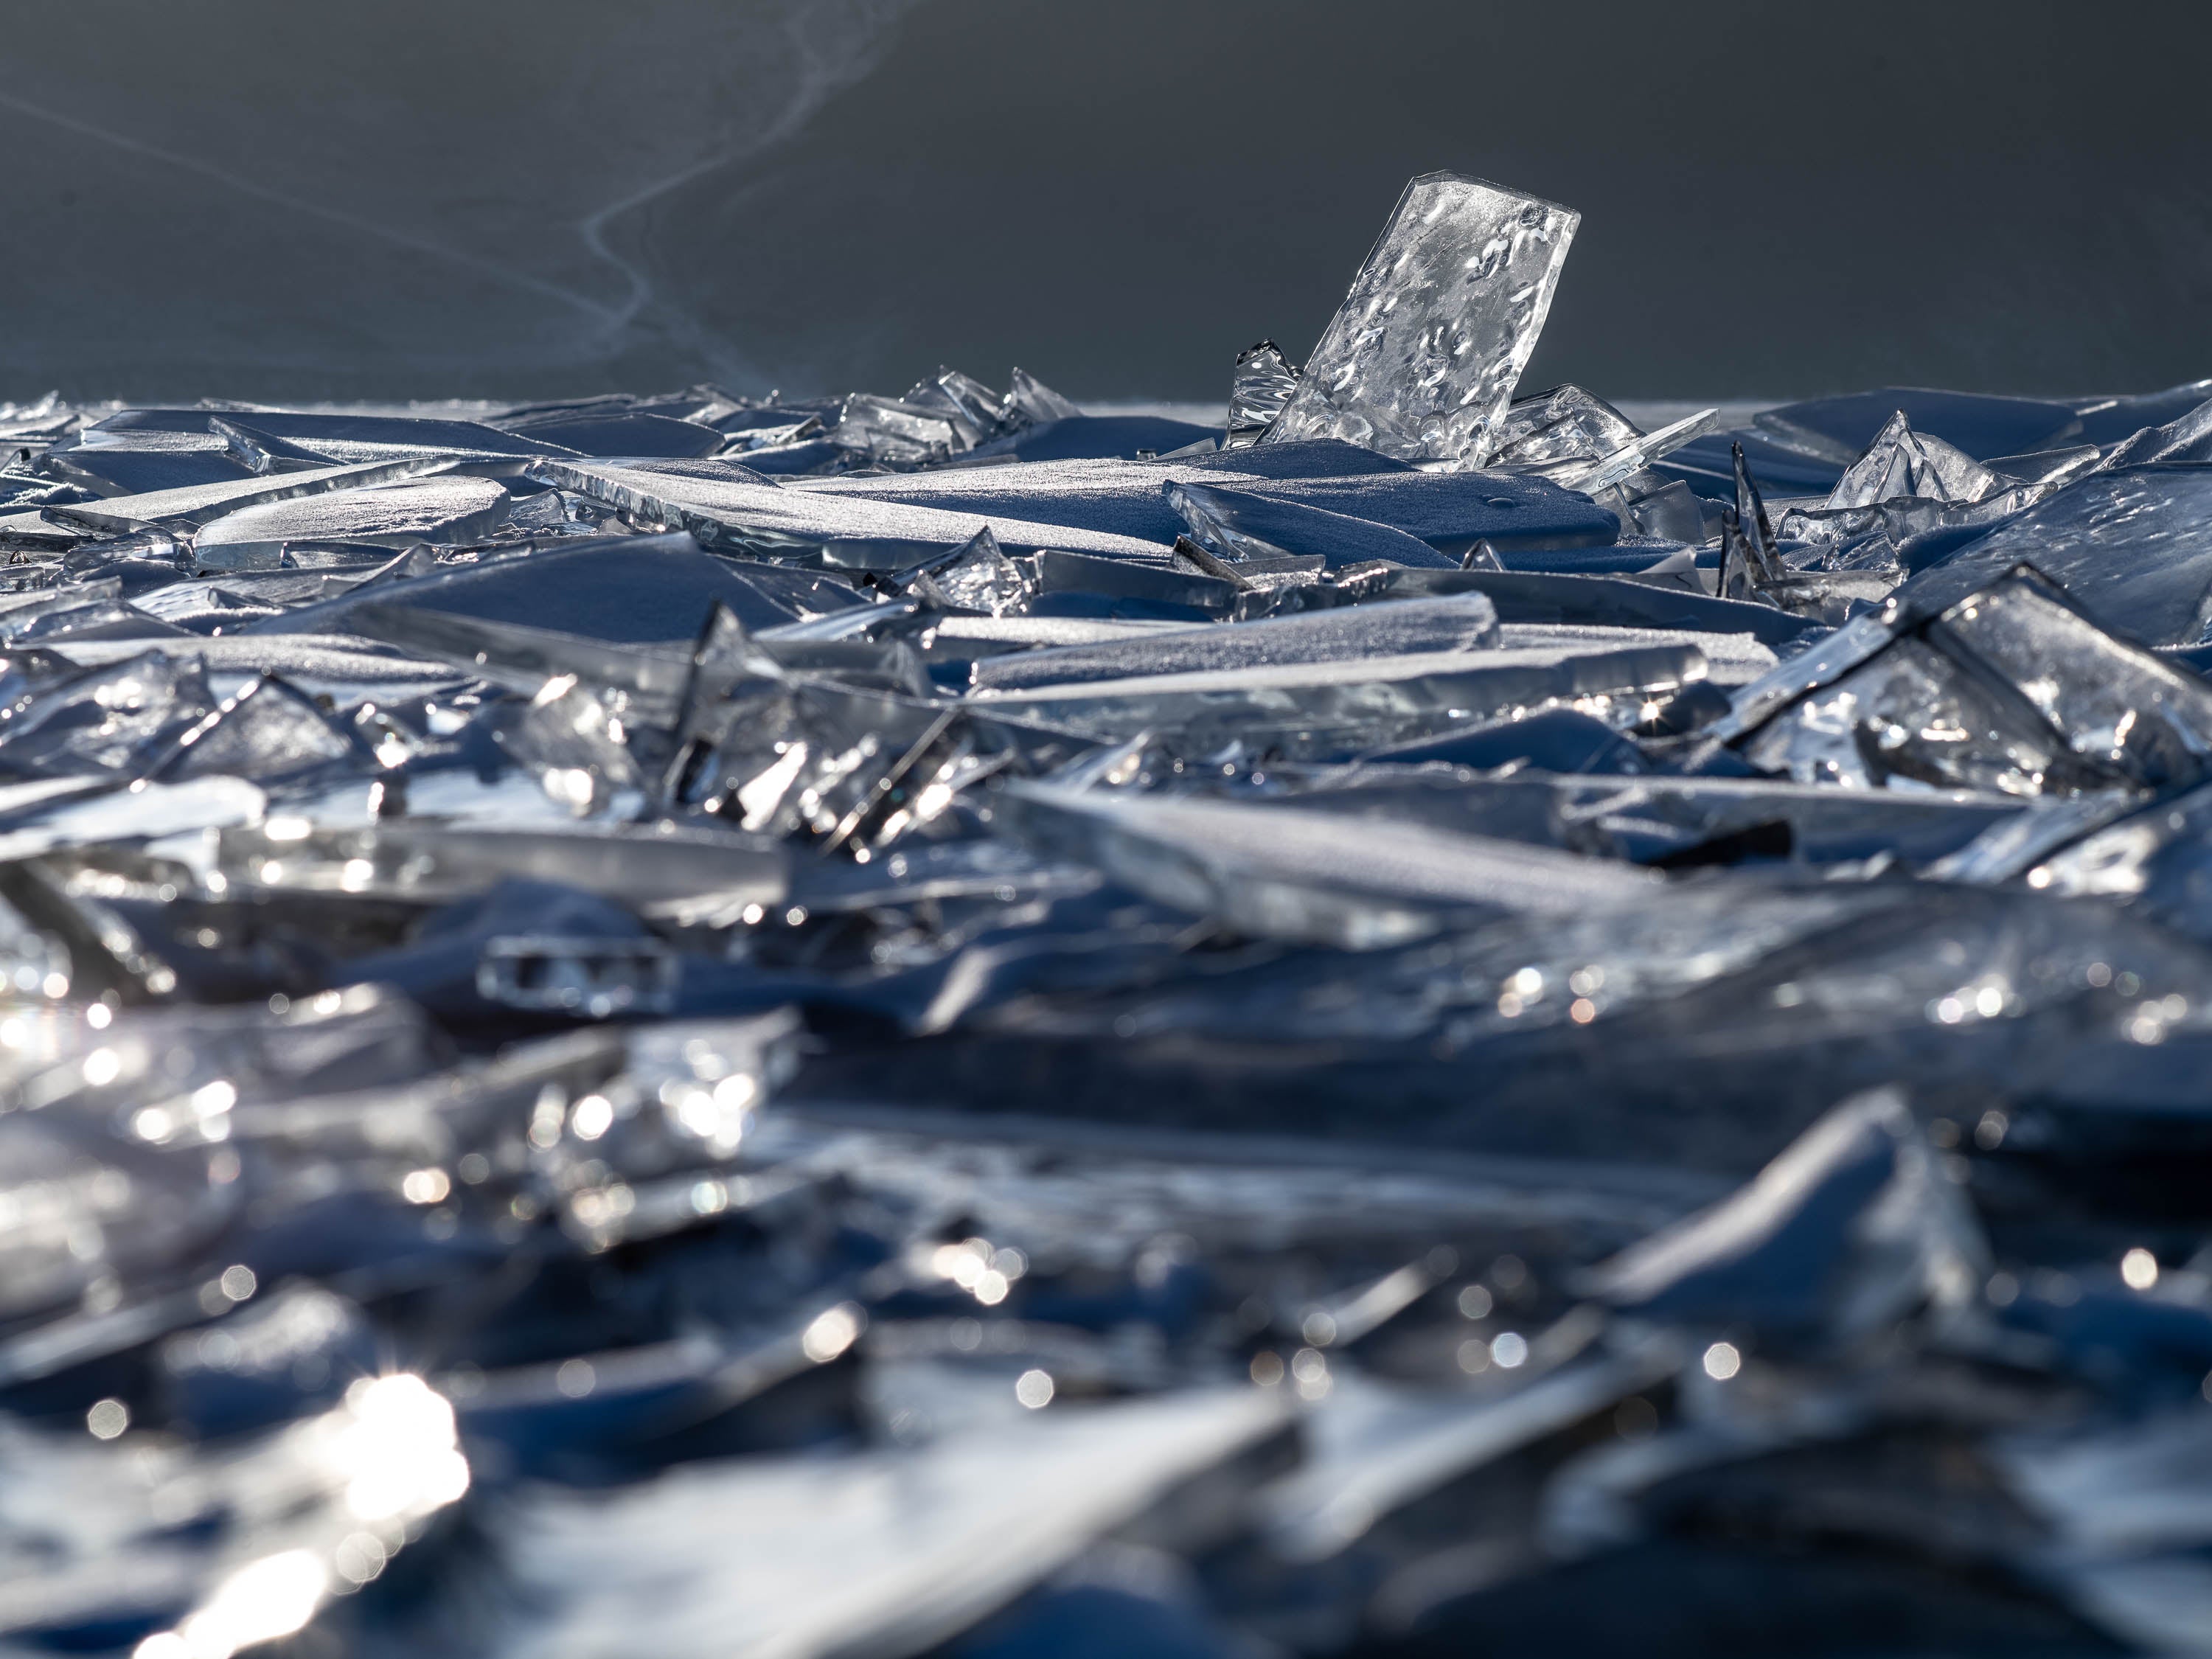 Close-up shot of a group of broken crystalline ice pieces, Lake Baikal #8, Siberia, Russia 